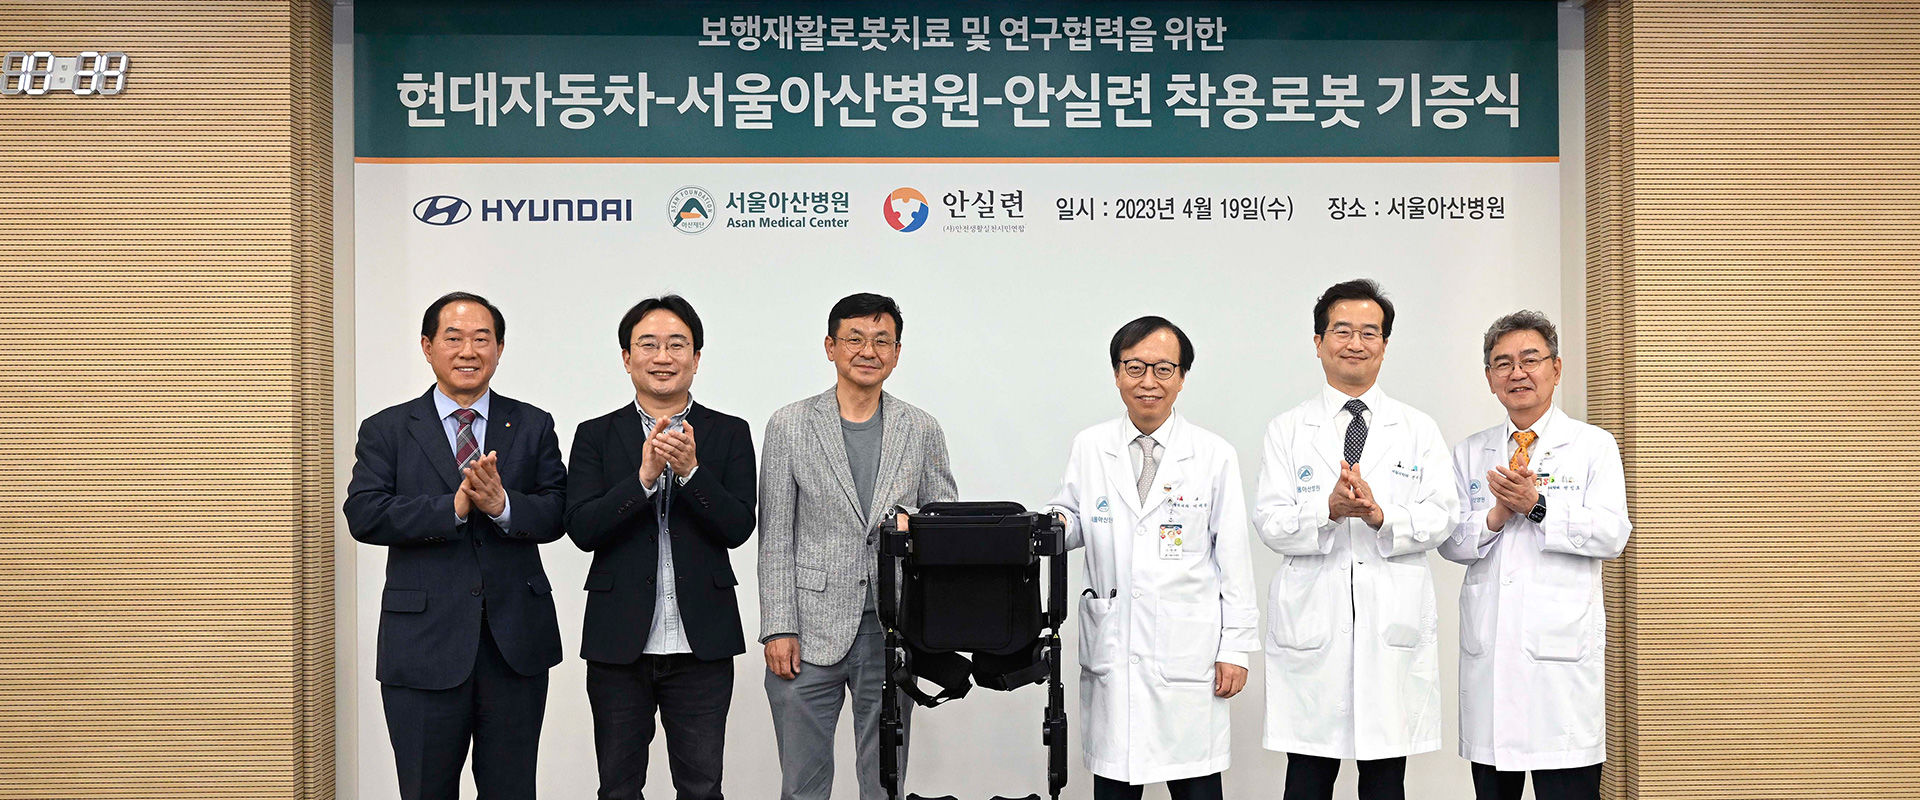 Hyundai Motor Works with Medical Centers in Korea to Utilize Its Wearable Robot ‘X-ble MEX’ for Patient Rehabilitation